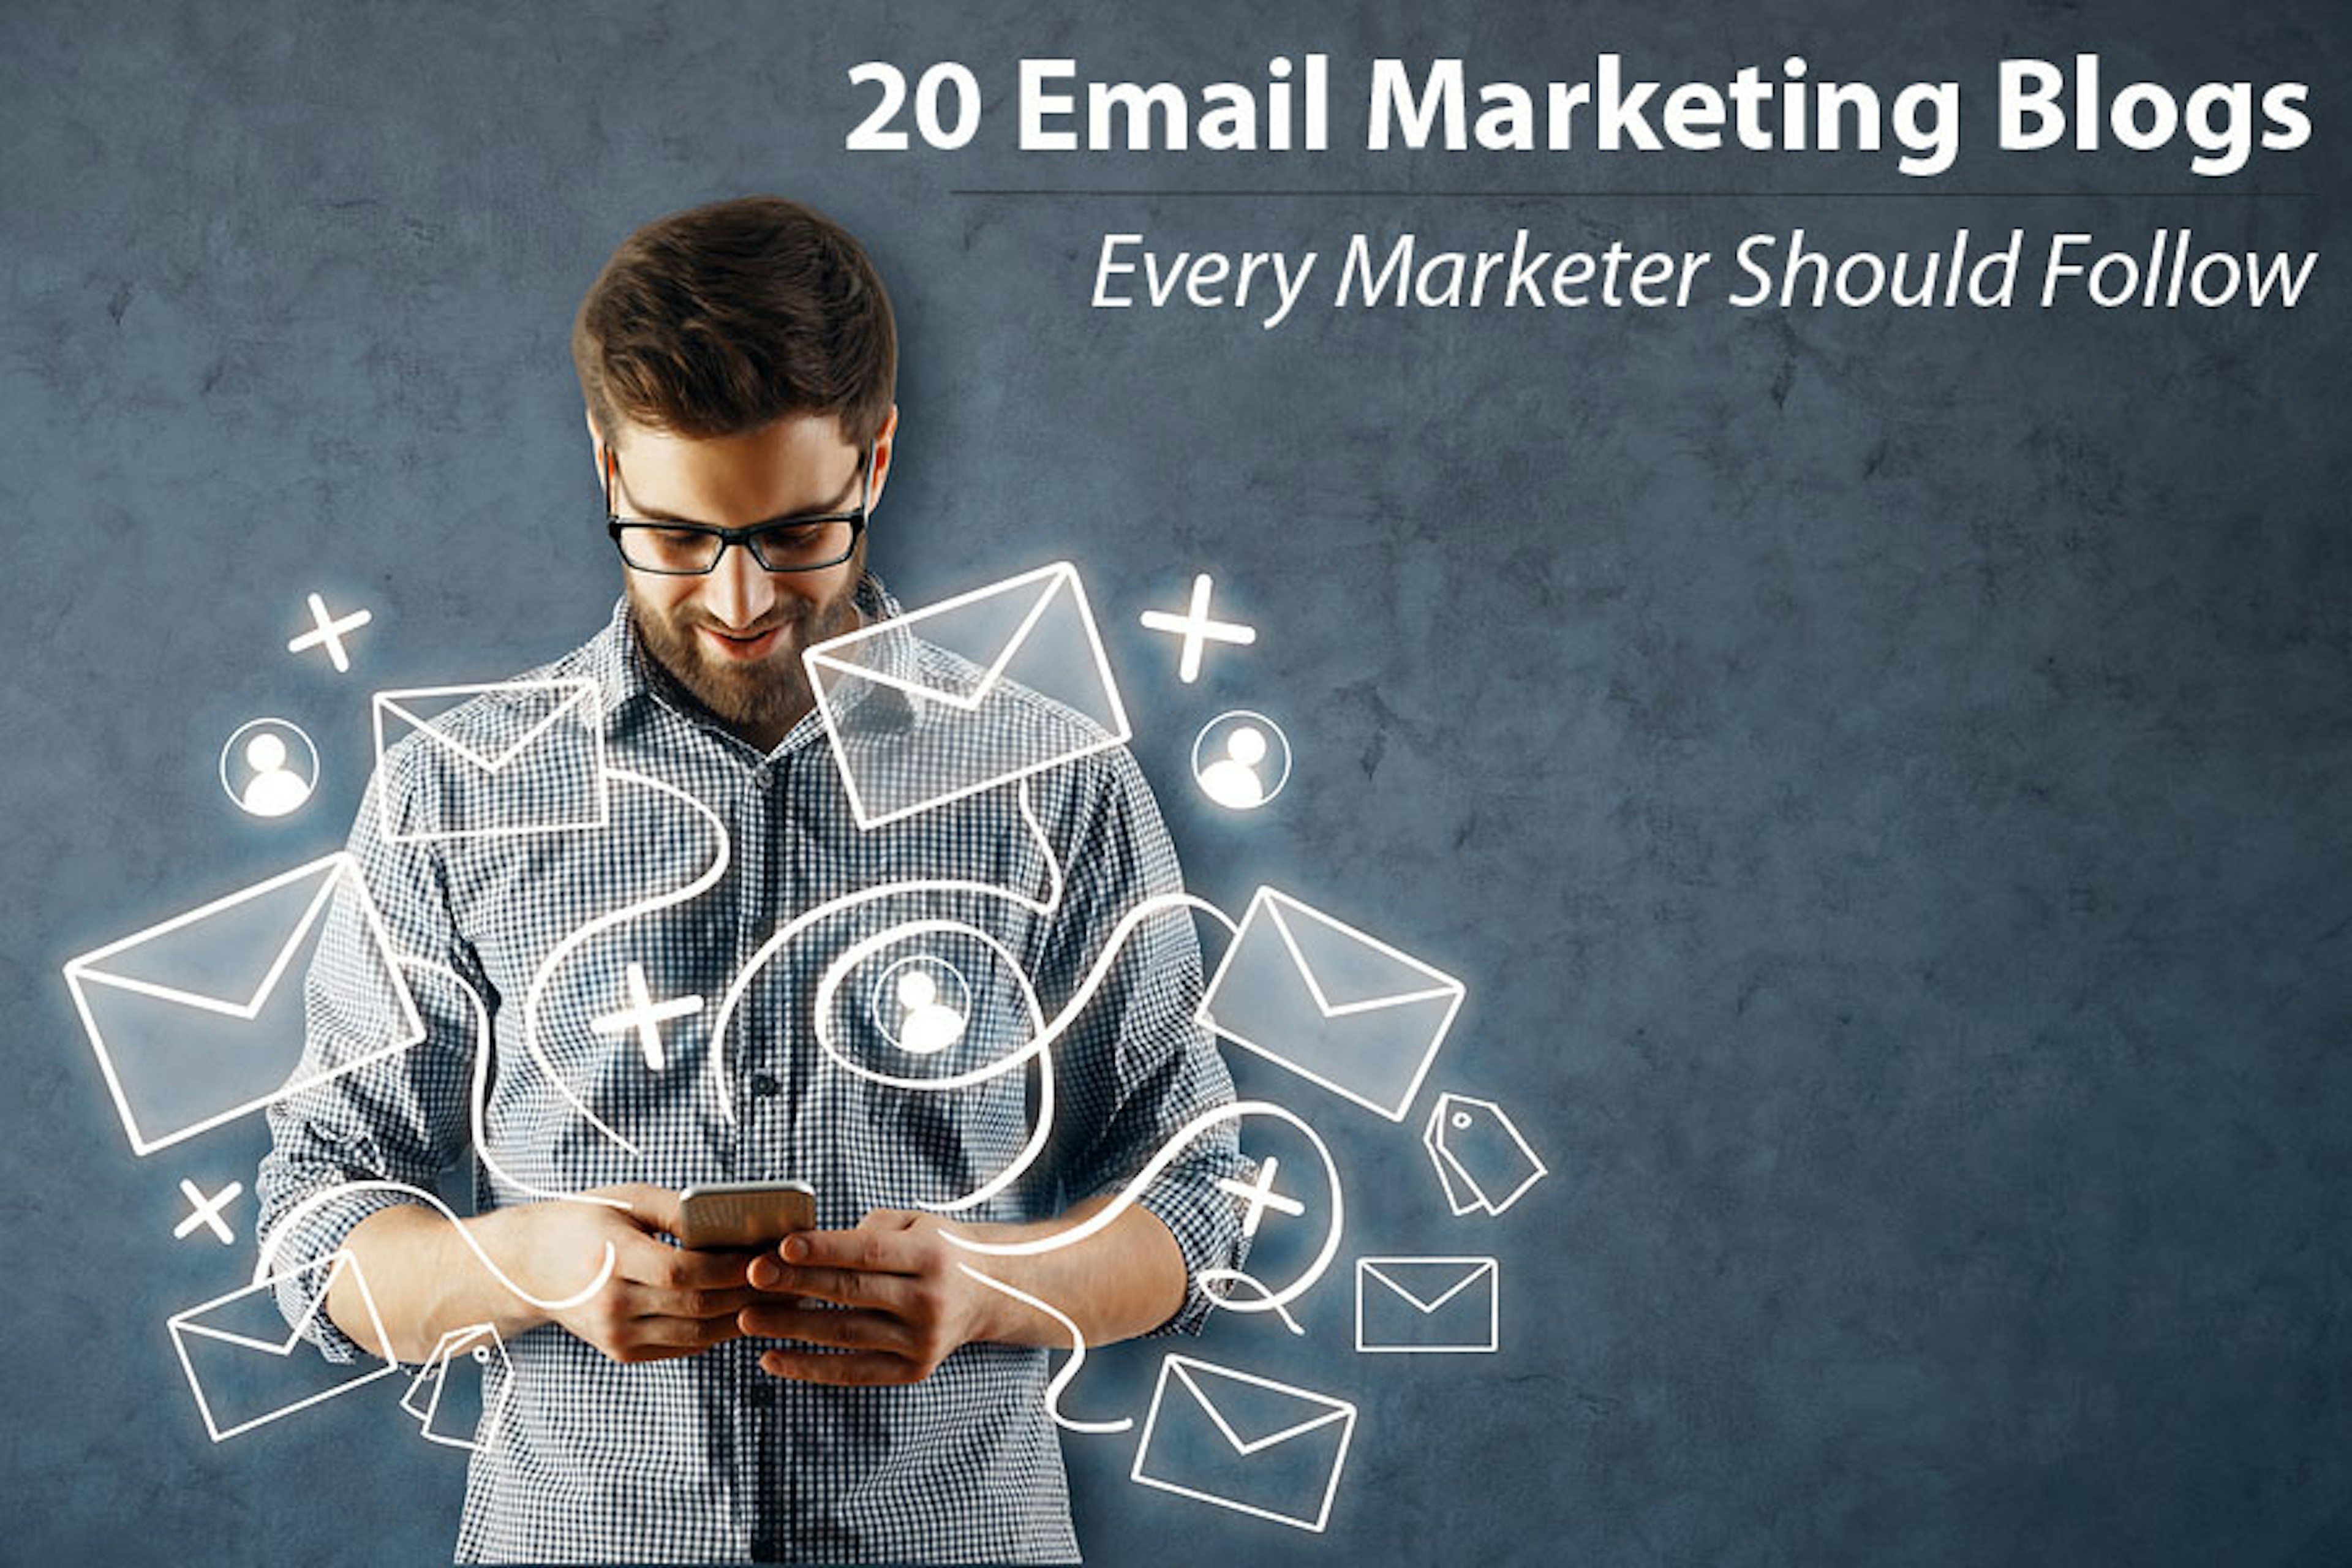 20 Email Marketing Blogs Every Marketer Should Follow